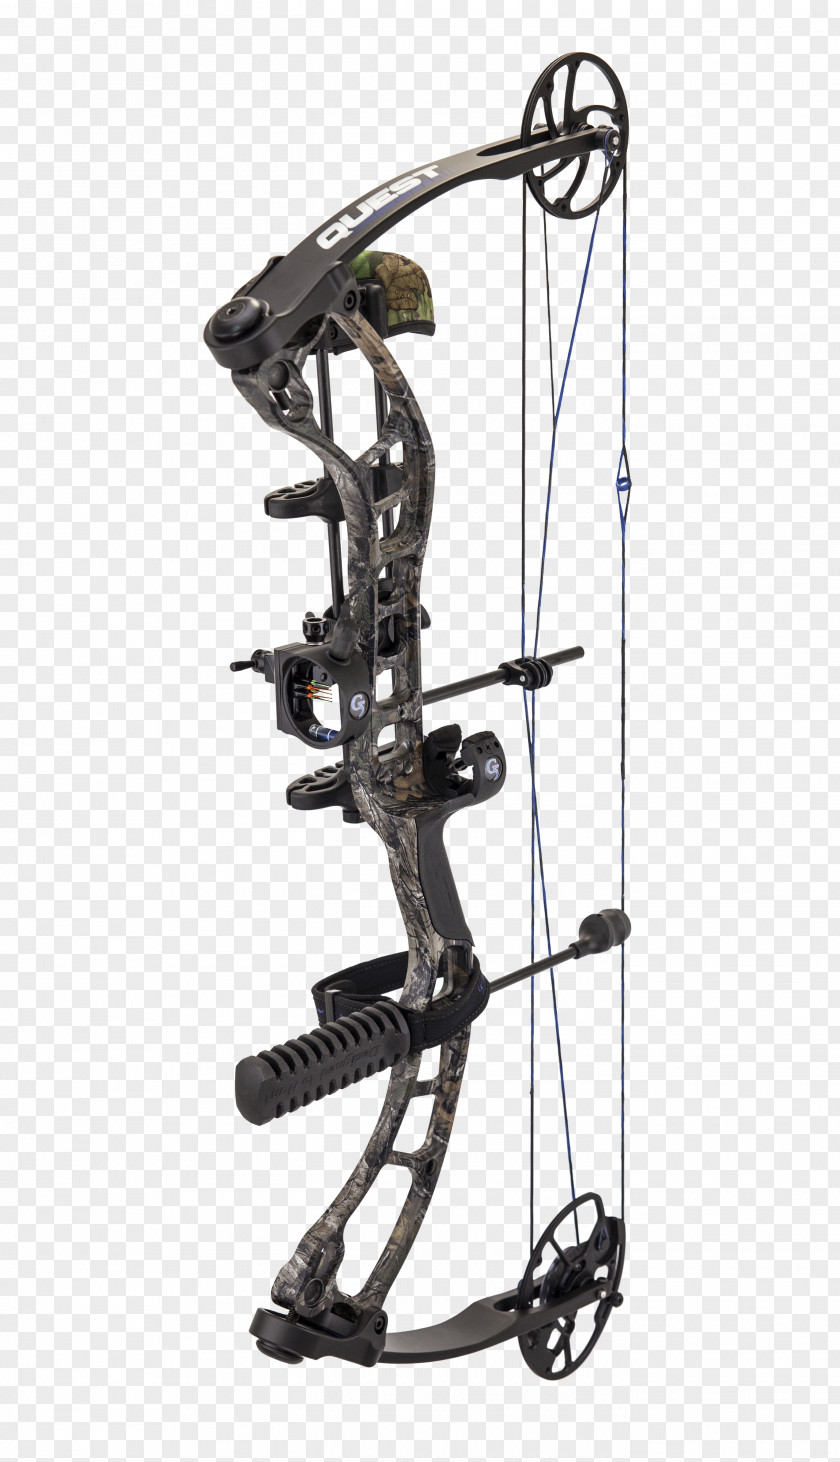 Archery Compound Bows Bow And Arrow Bowhunting PNG